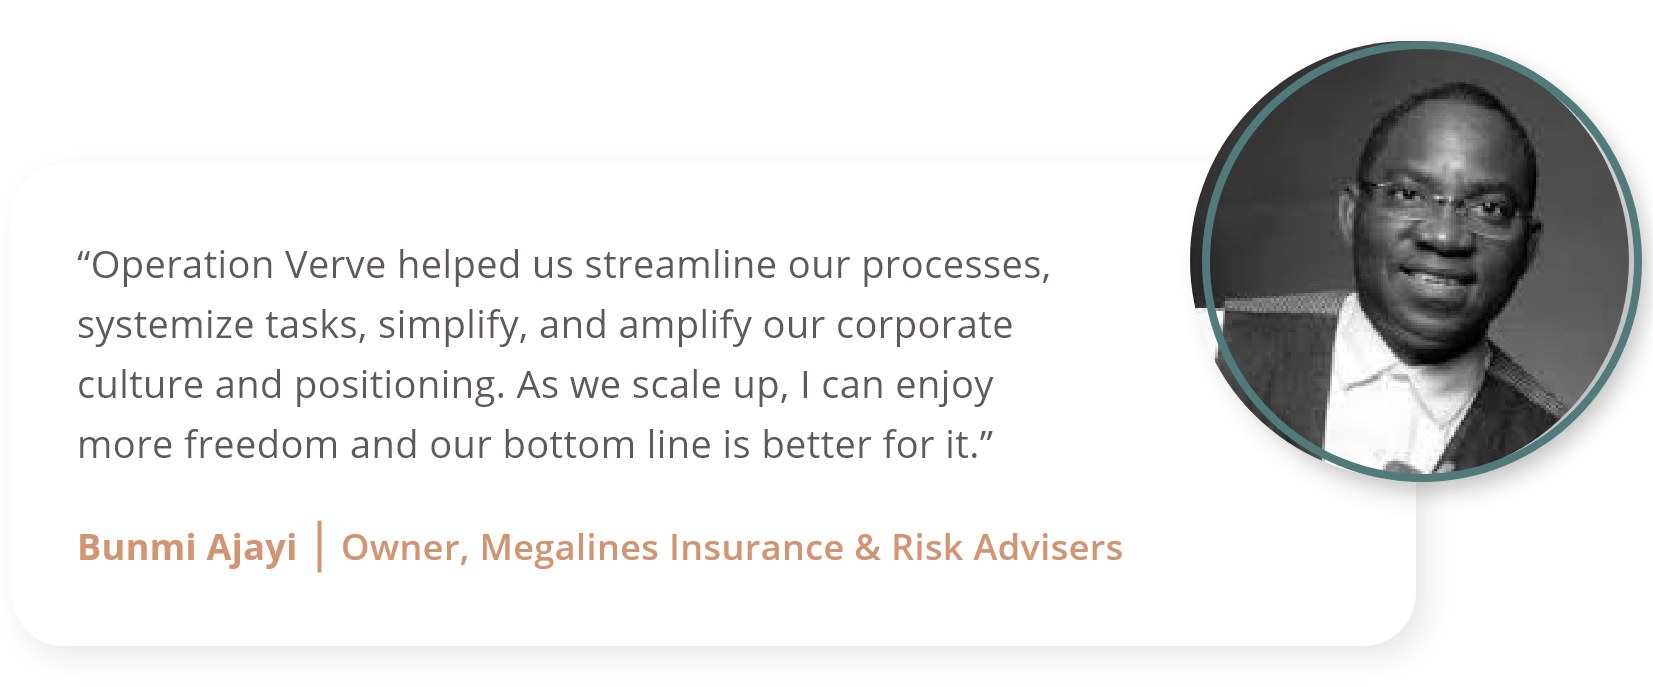 megalines insurance and risk advisers testimonial